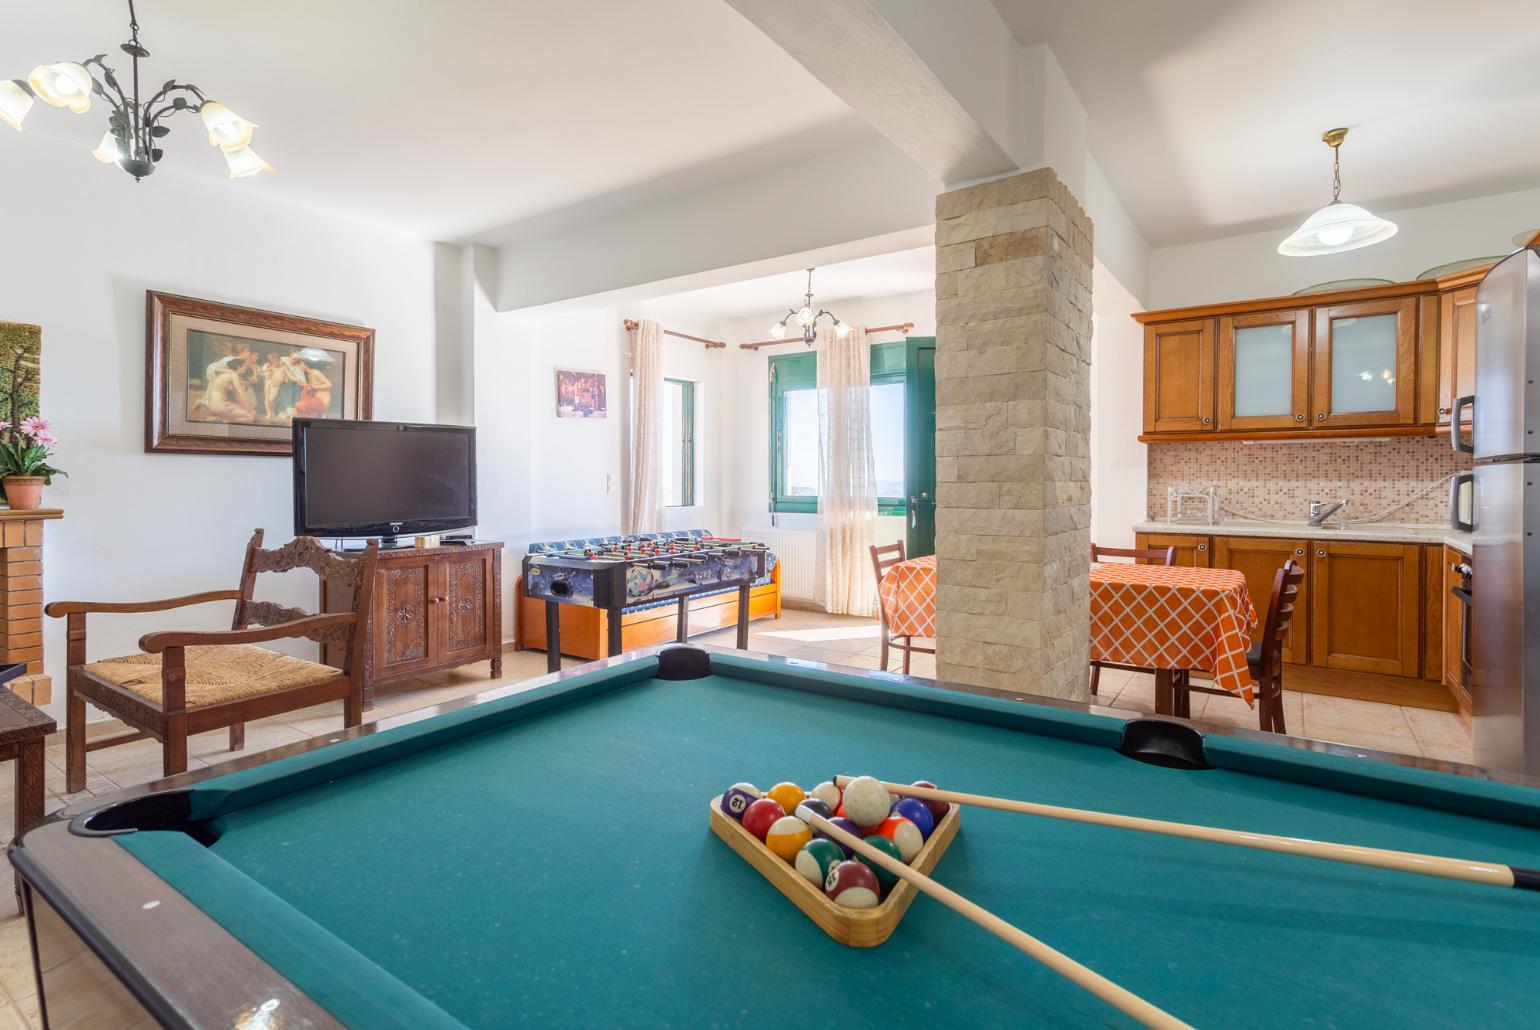 Second living room with sofas, dining area, kitchen, pool table, table football, ornamental fireplace, WiFi internet, satellite TV, and terrace access